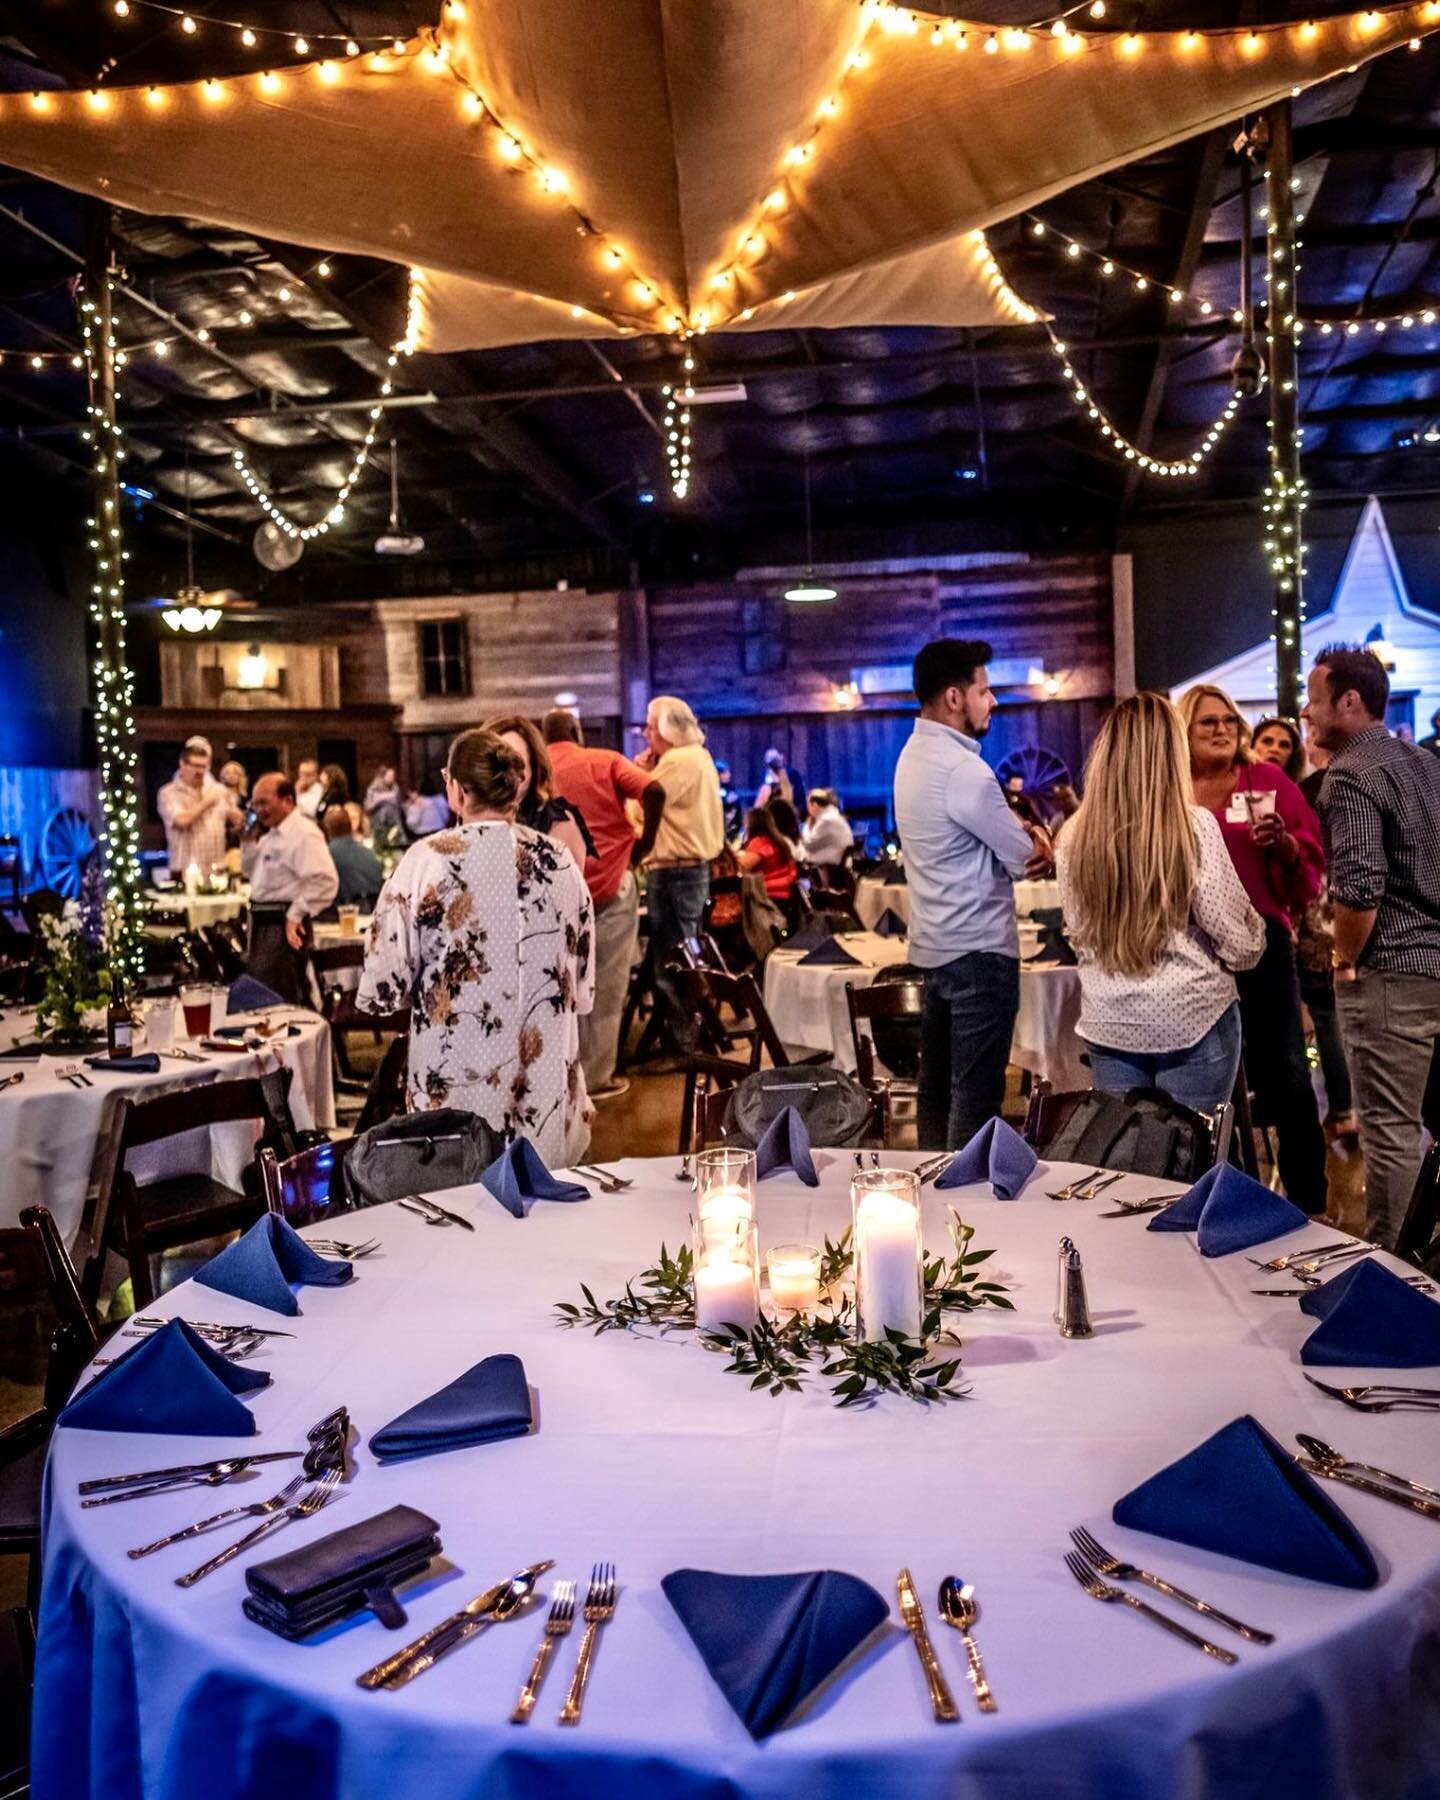 ✨Our western-themed venue in Fort Worth, Texas can truly bring the best of indoor and outdoor spaces together to make your special event stand out!

Need to book an event? Call (817) 624-1111

📸: @ogrowald 

#visitfortworth #fortworth #ranchsnaps #t